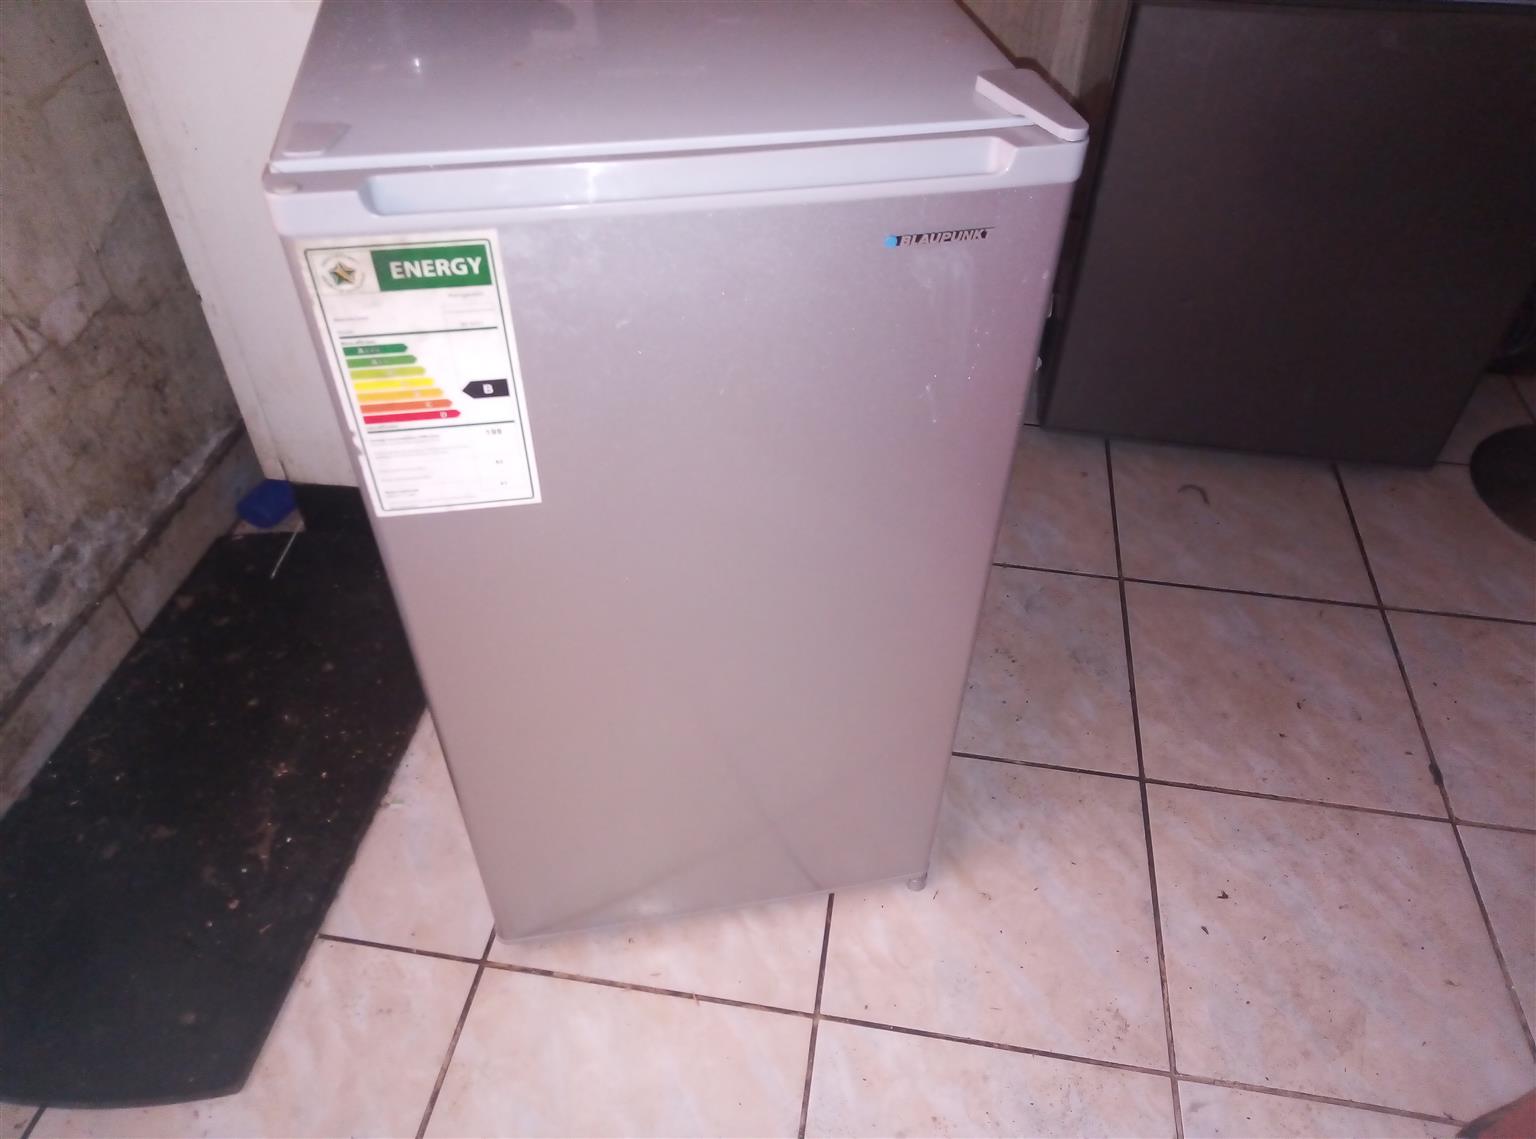 BED, FRIDGE, DISH WASHER FOR SALE IN GOOD CONDITION 0743444607